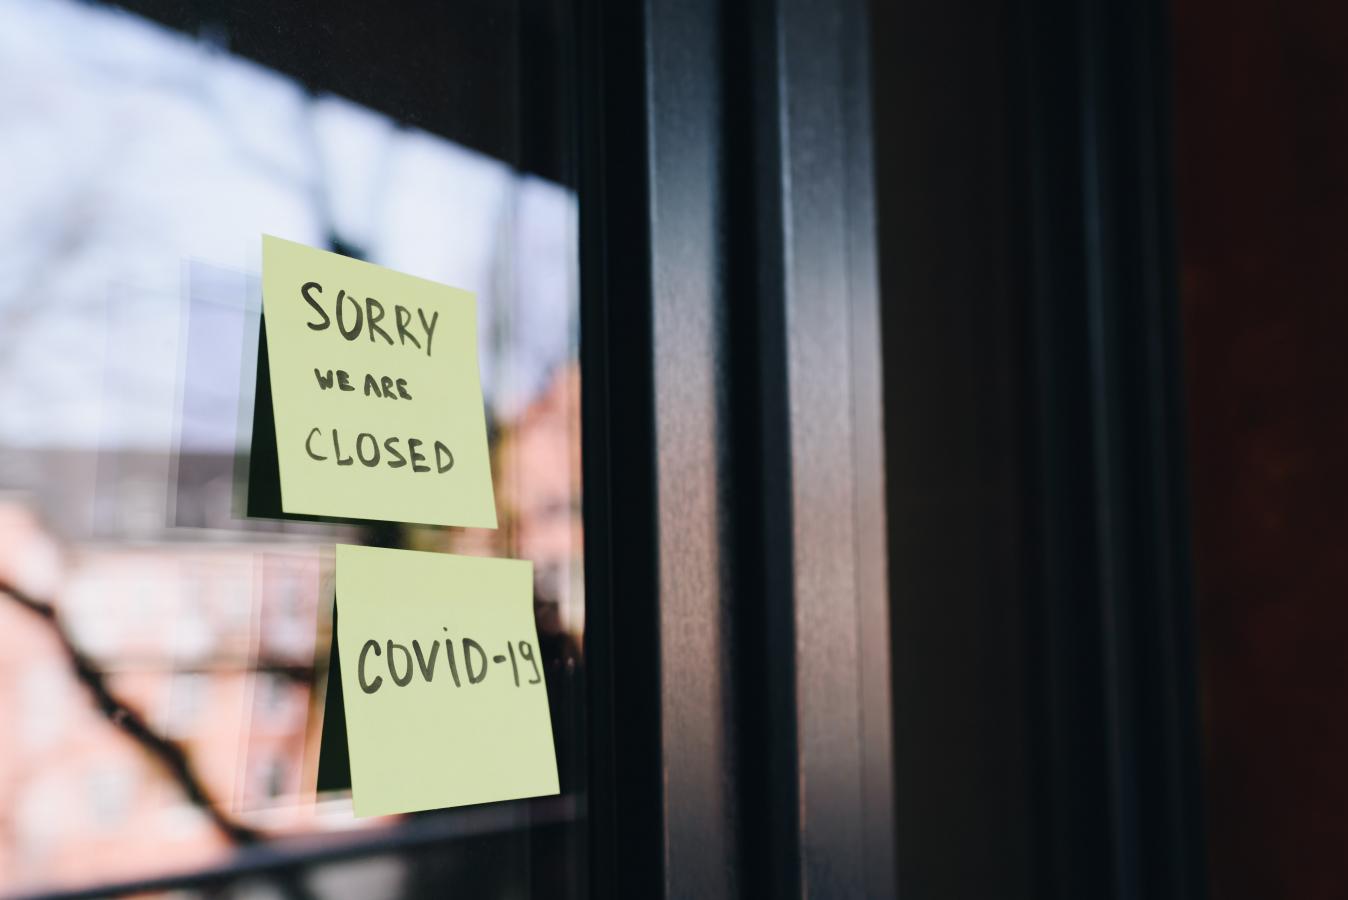 A note on the door that says: Sorry, we are closed. Covid-19. 